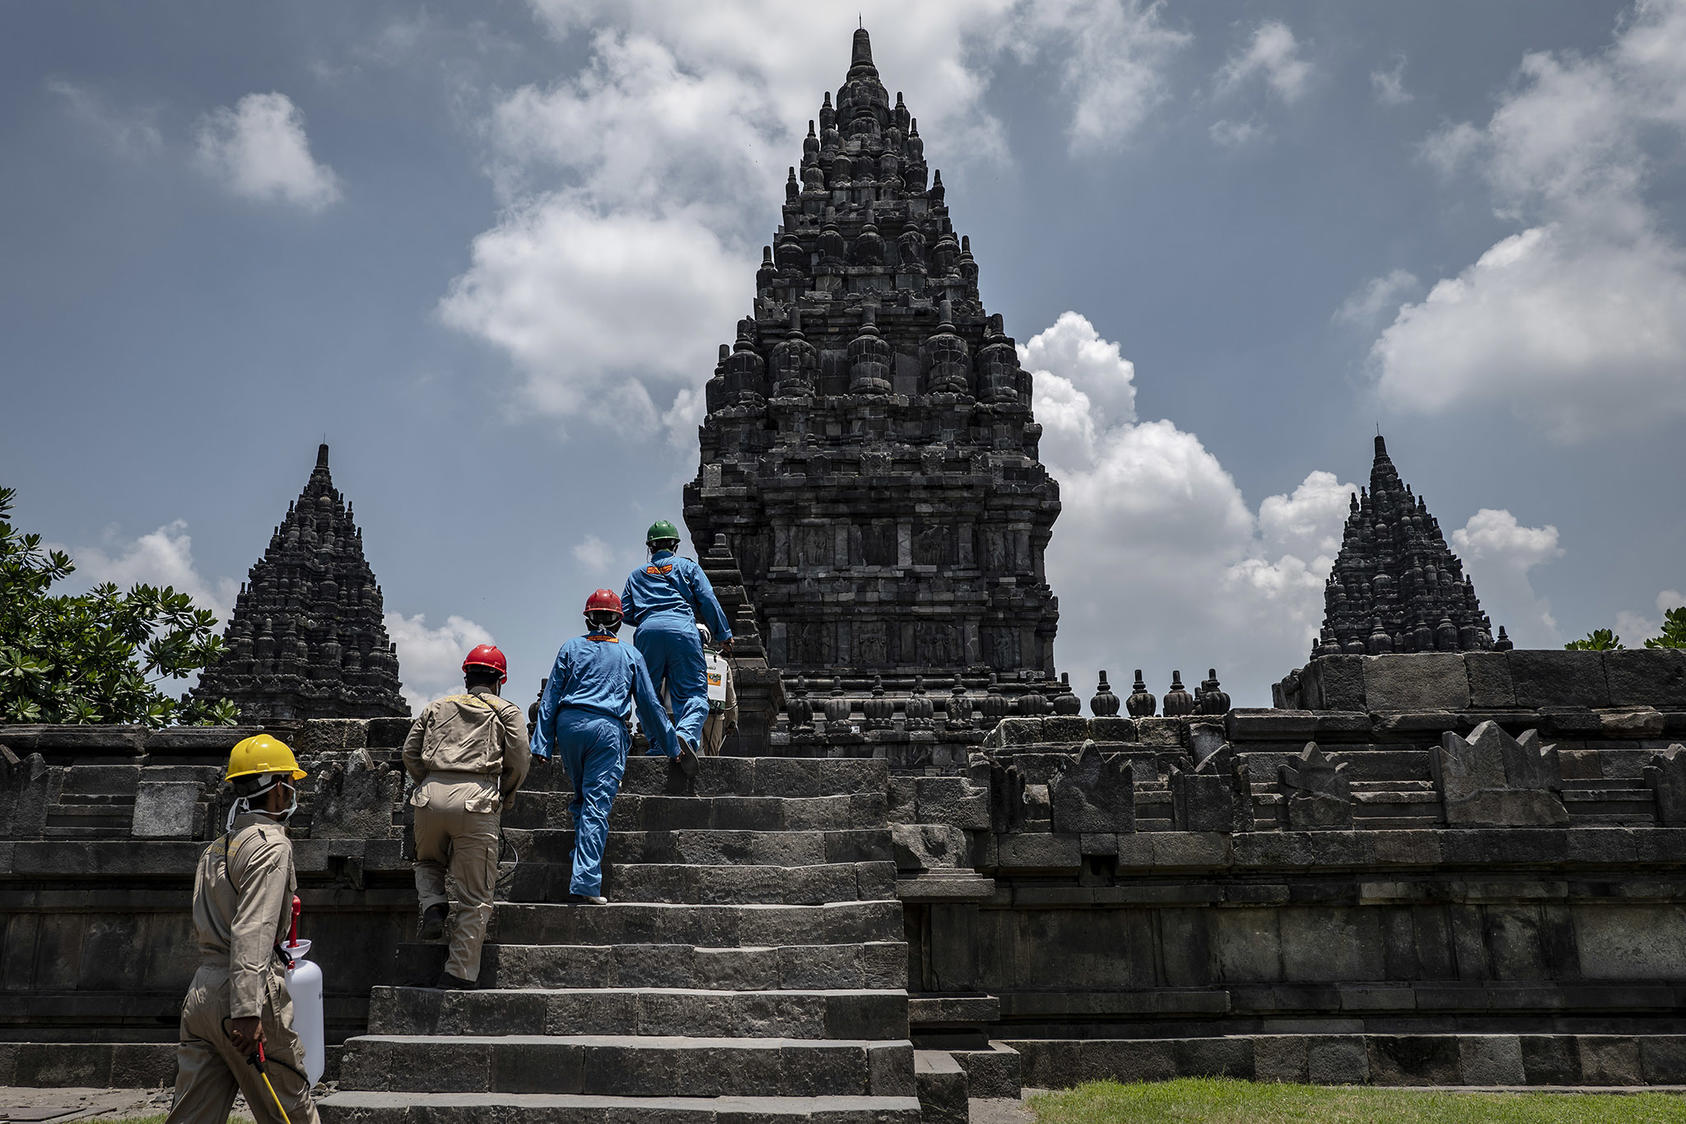 Workers prepare to disinfect the Prambanan temple complex in Yogyakarta, Indonesia, March 17, 2020. (Ulet Ifansasti/The New York Times)